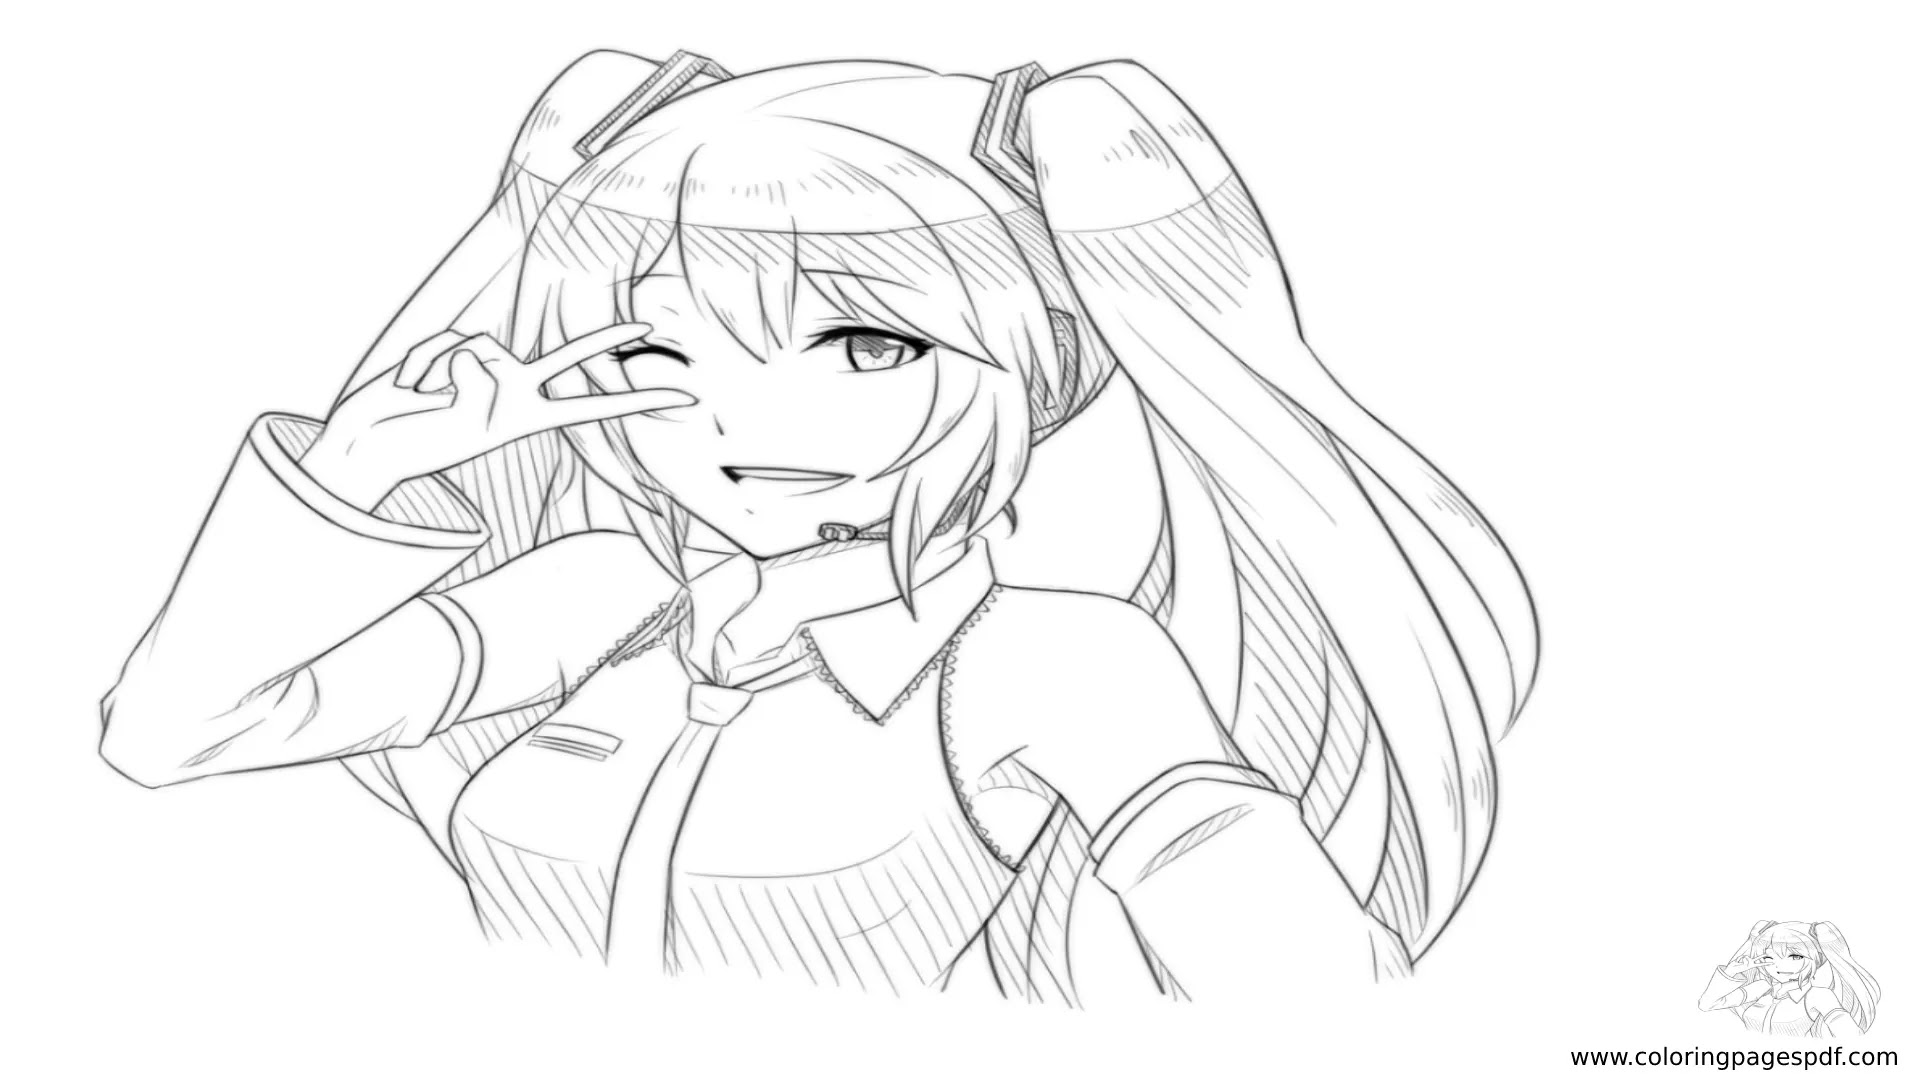 Coloring Page Of Hatsune Miku